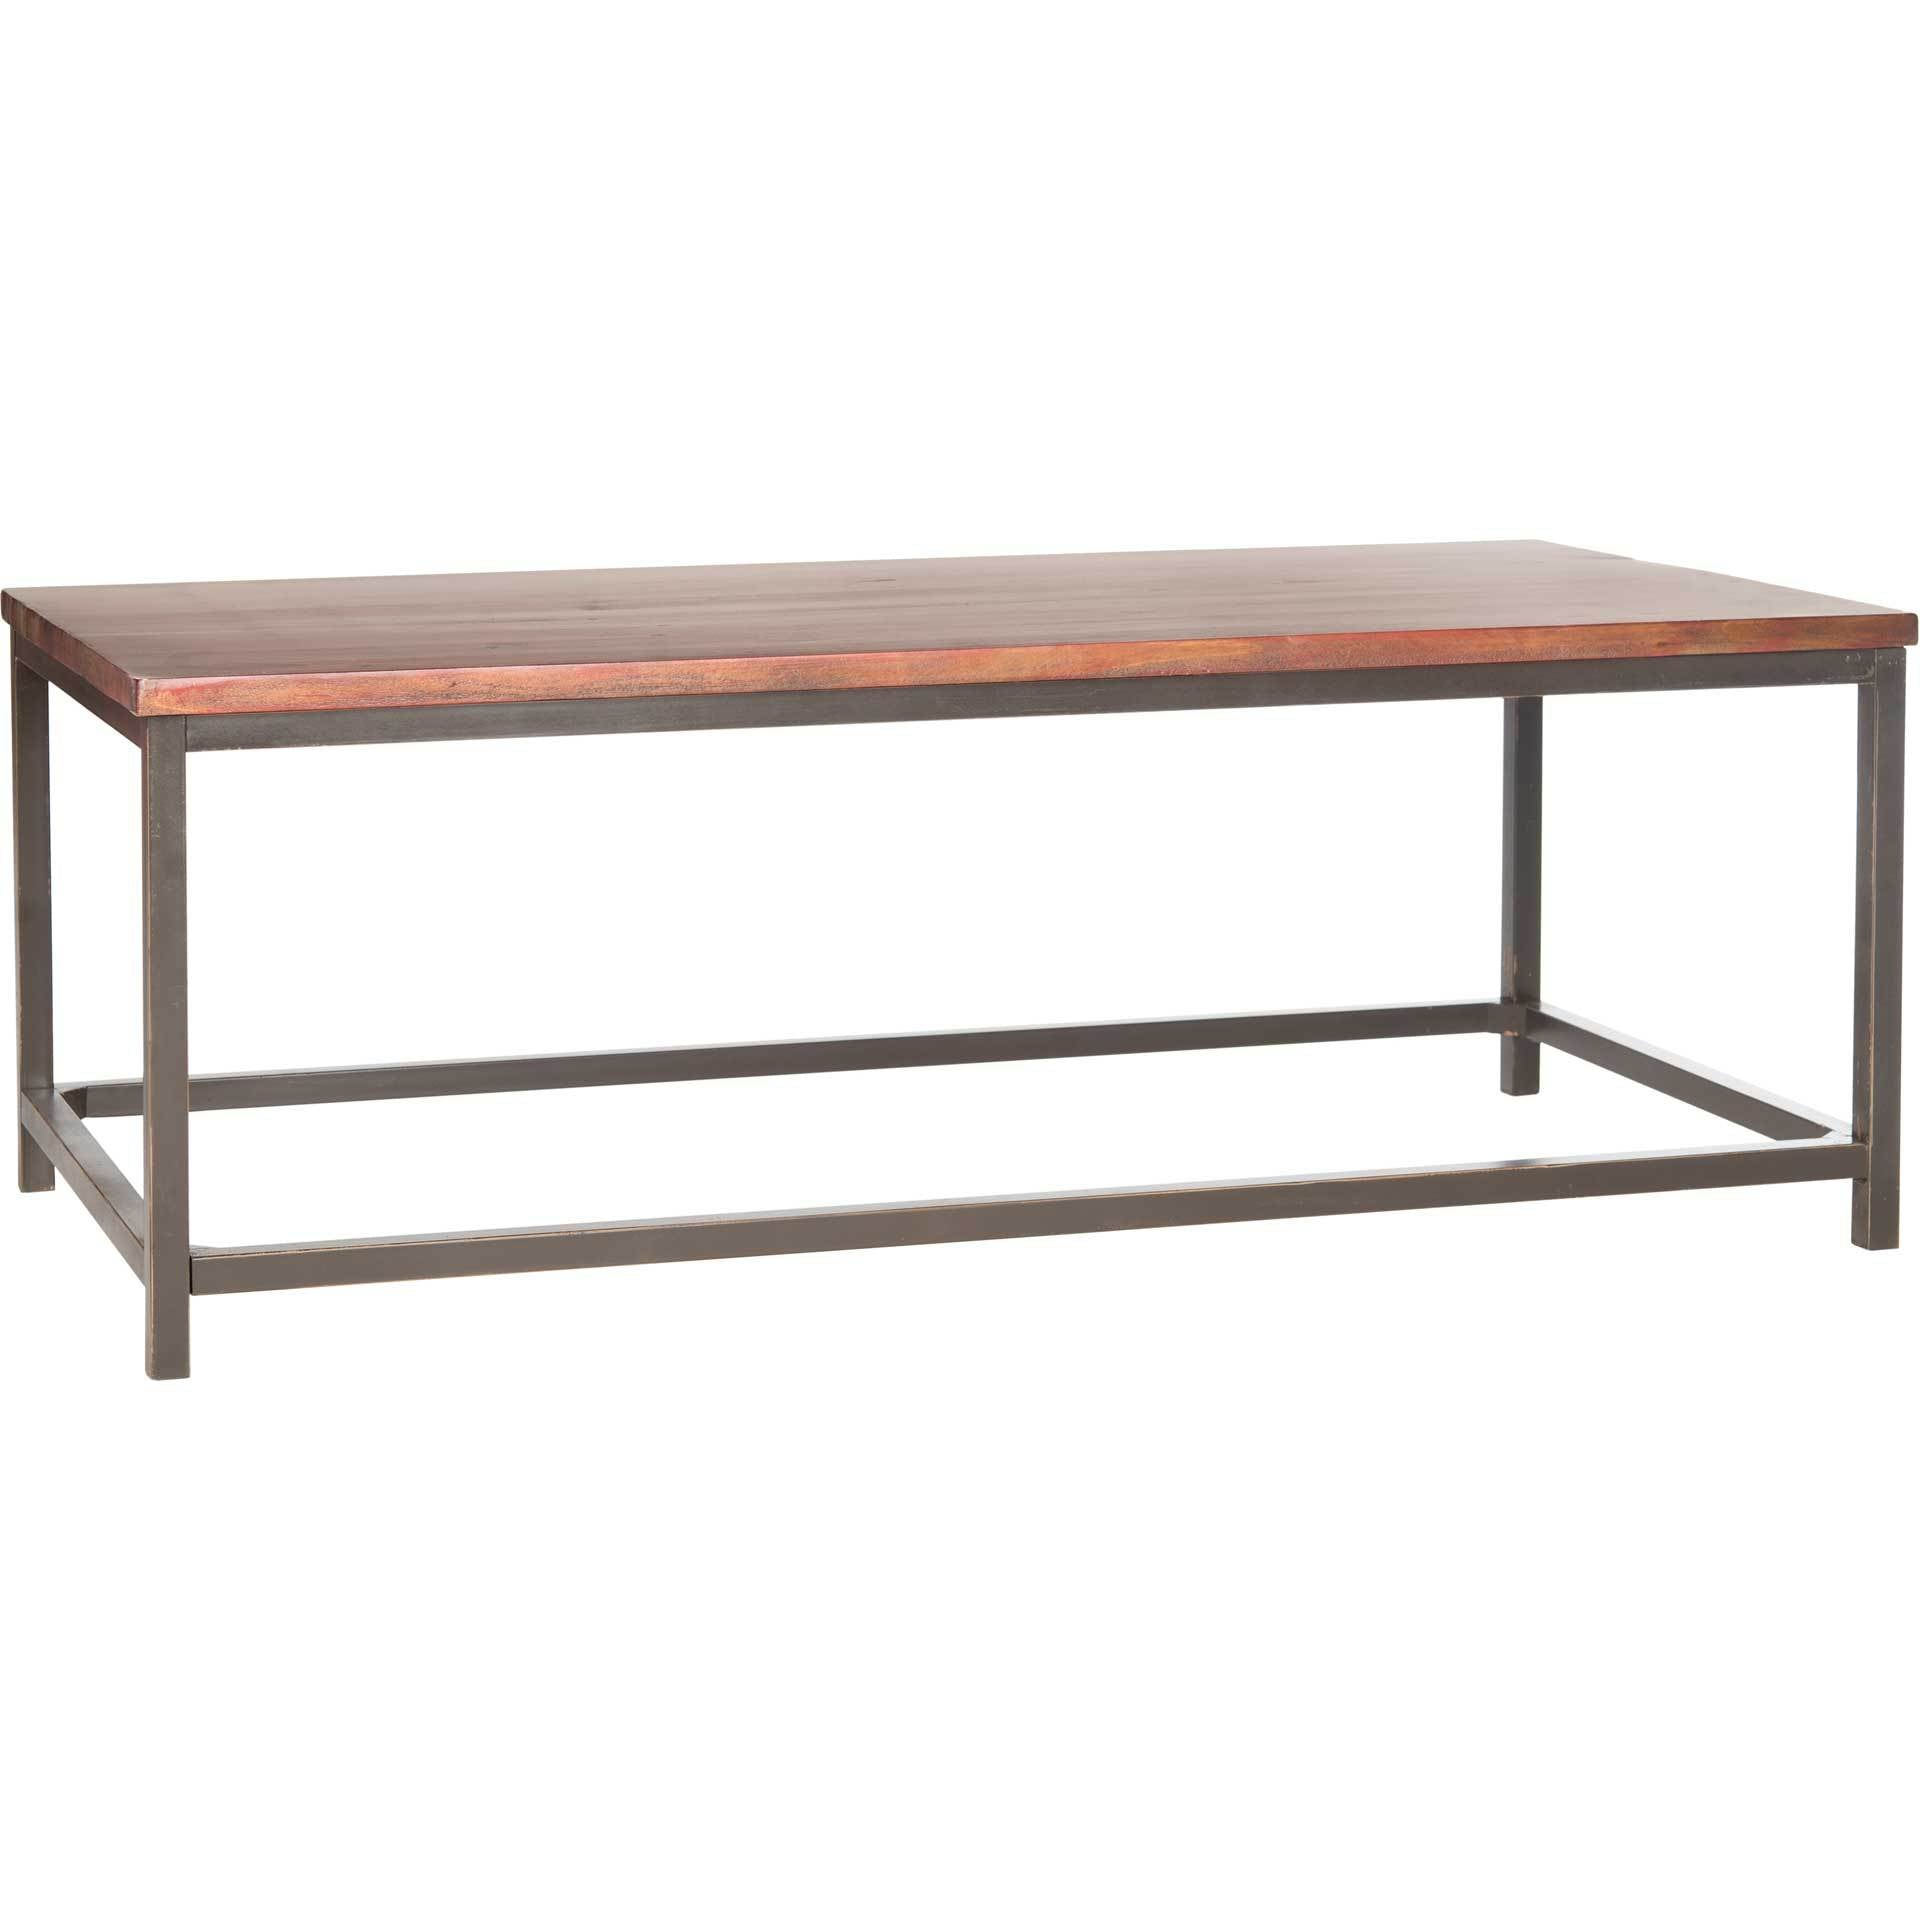 Alex Coffee Table Distressed Red Barn